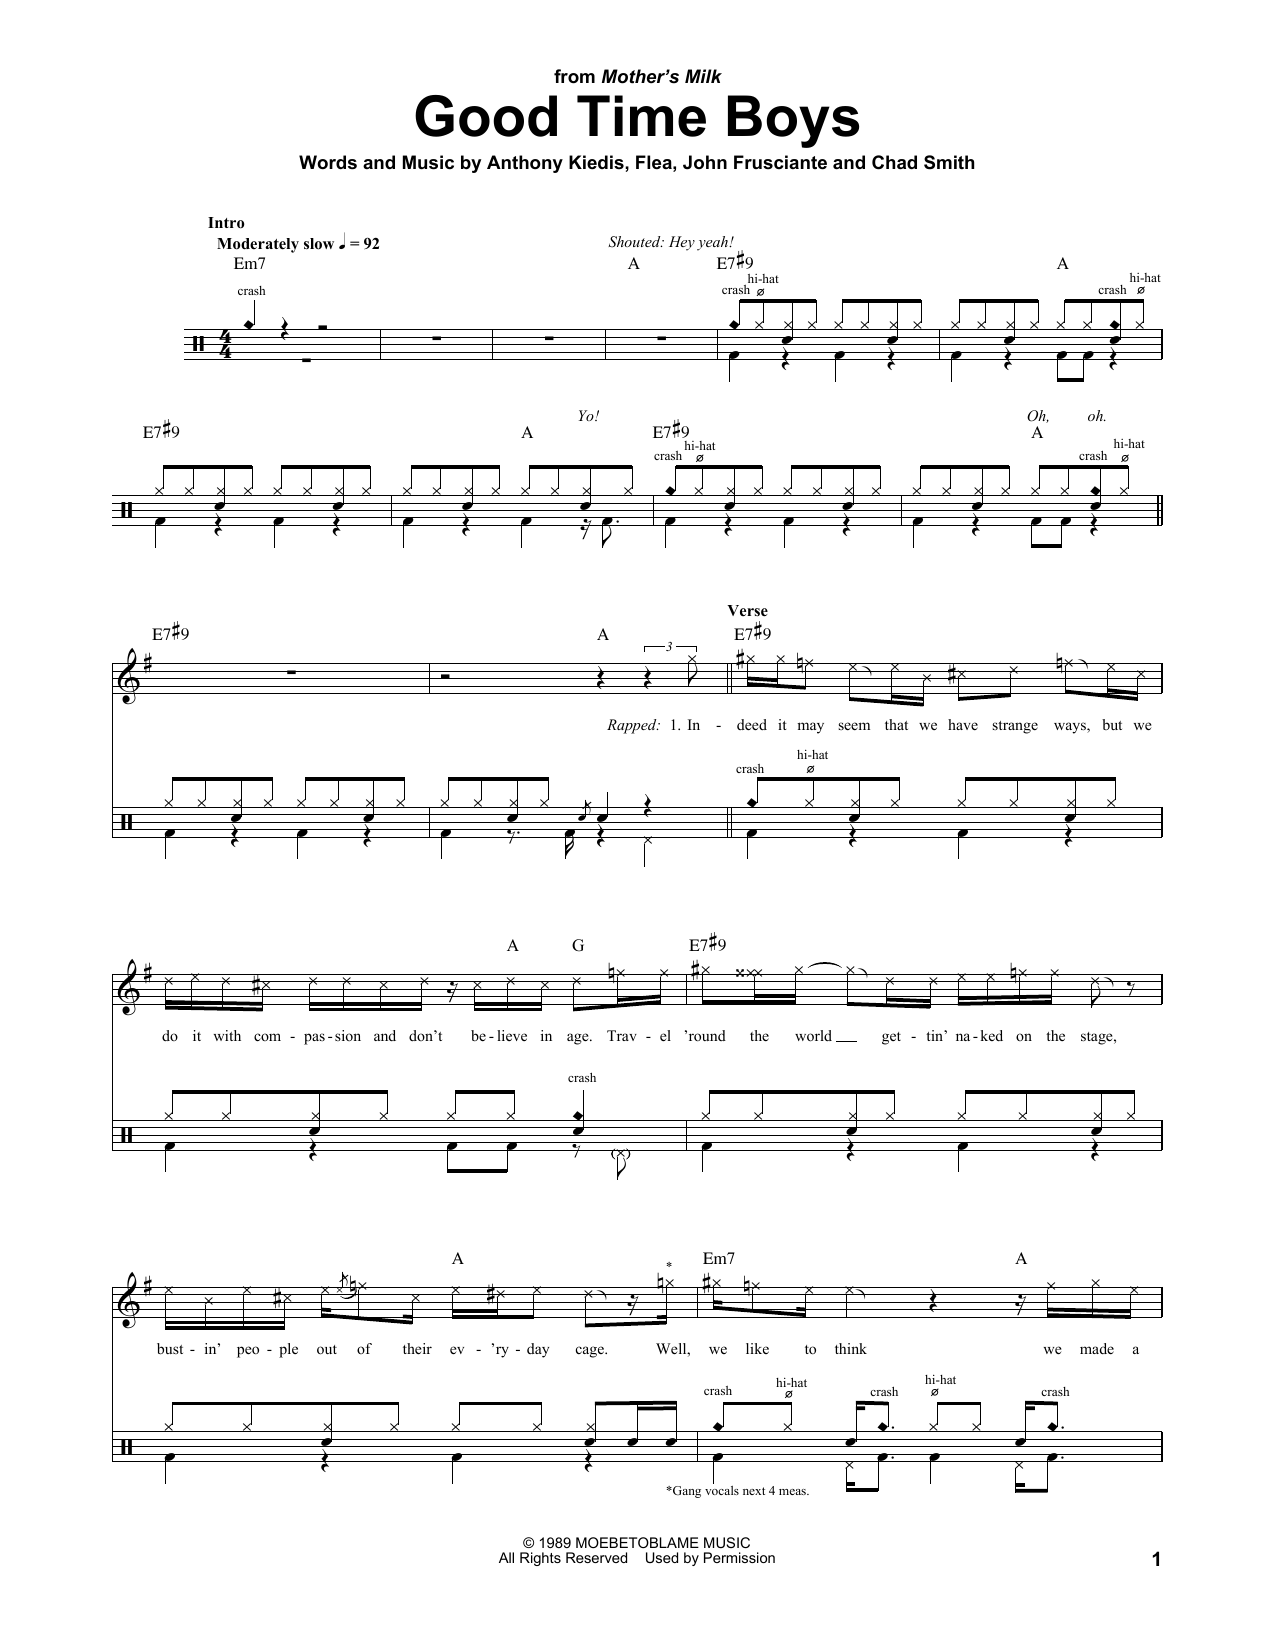 Download Red Hot Chili Peppers Good Time Boys Sheet Music